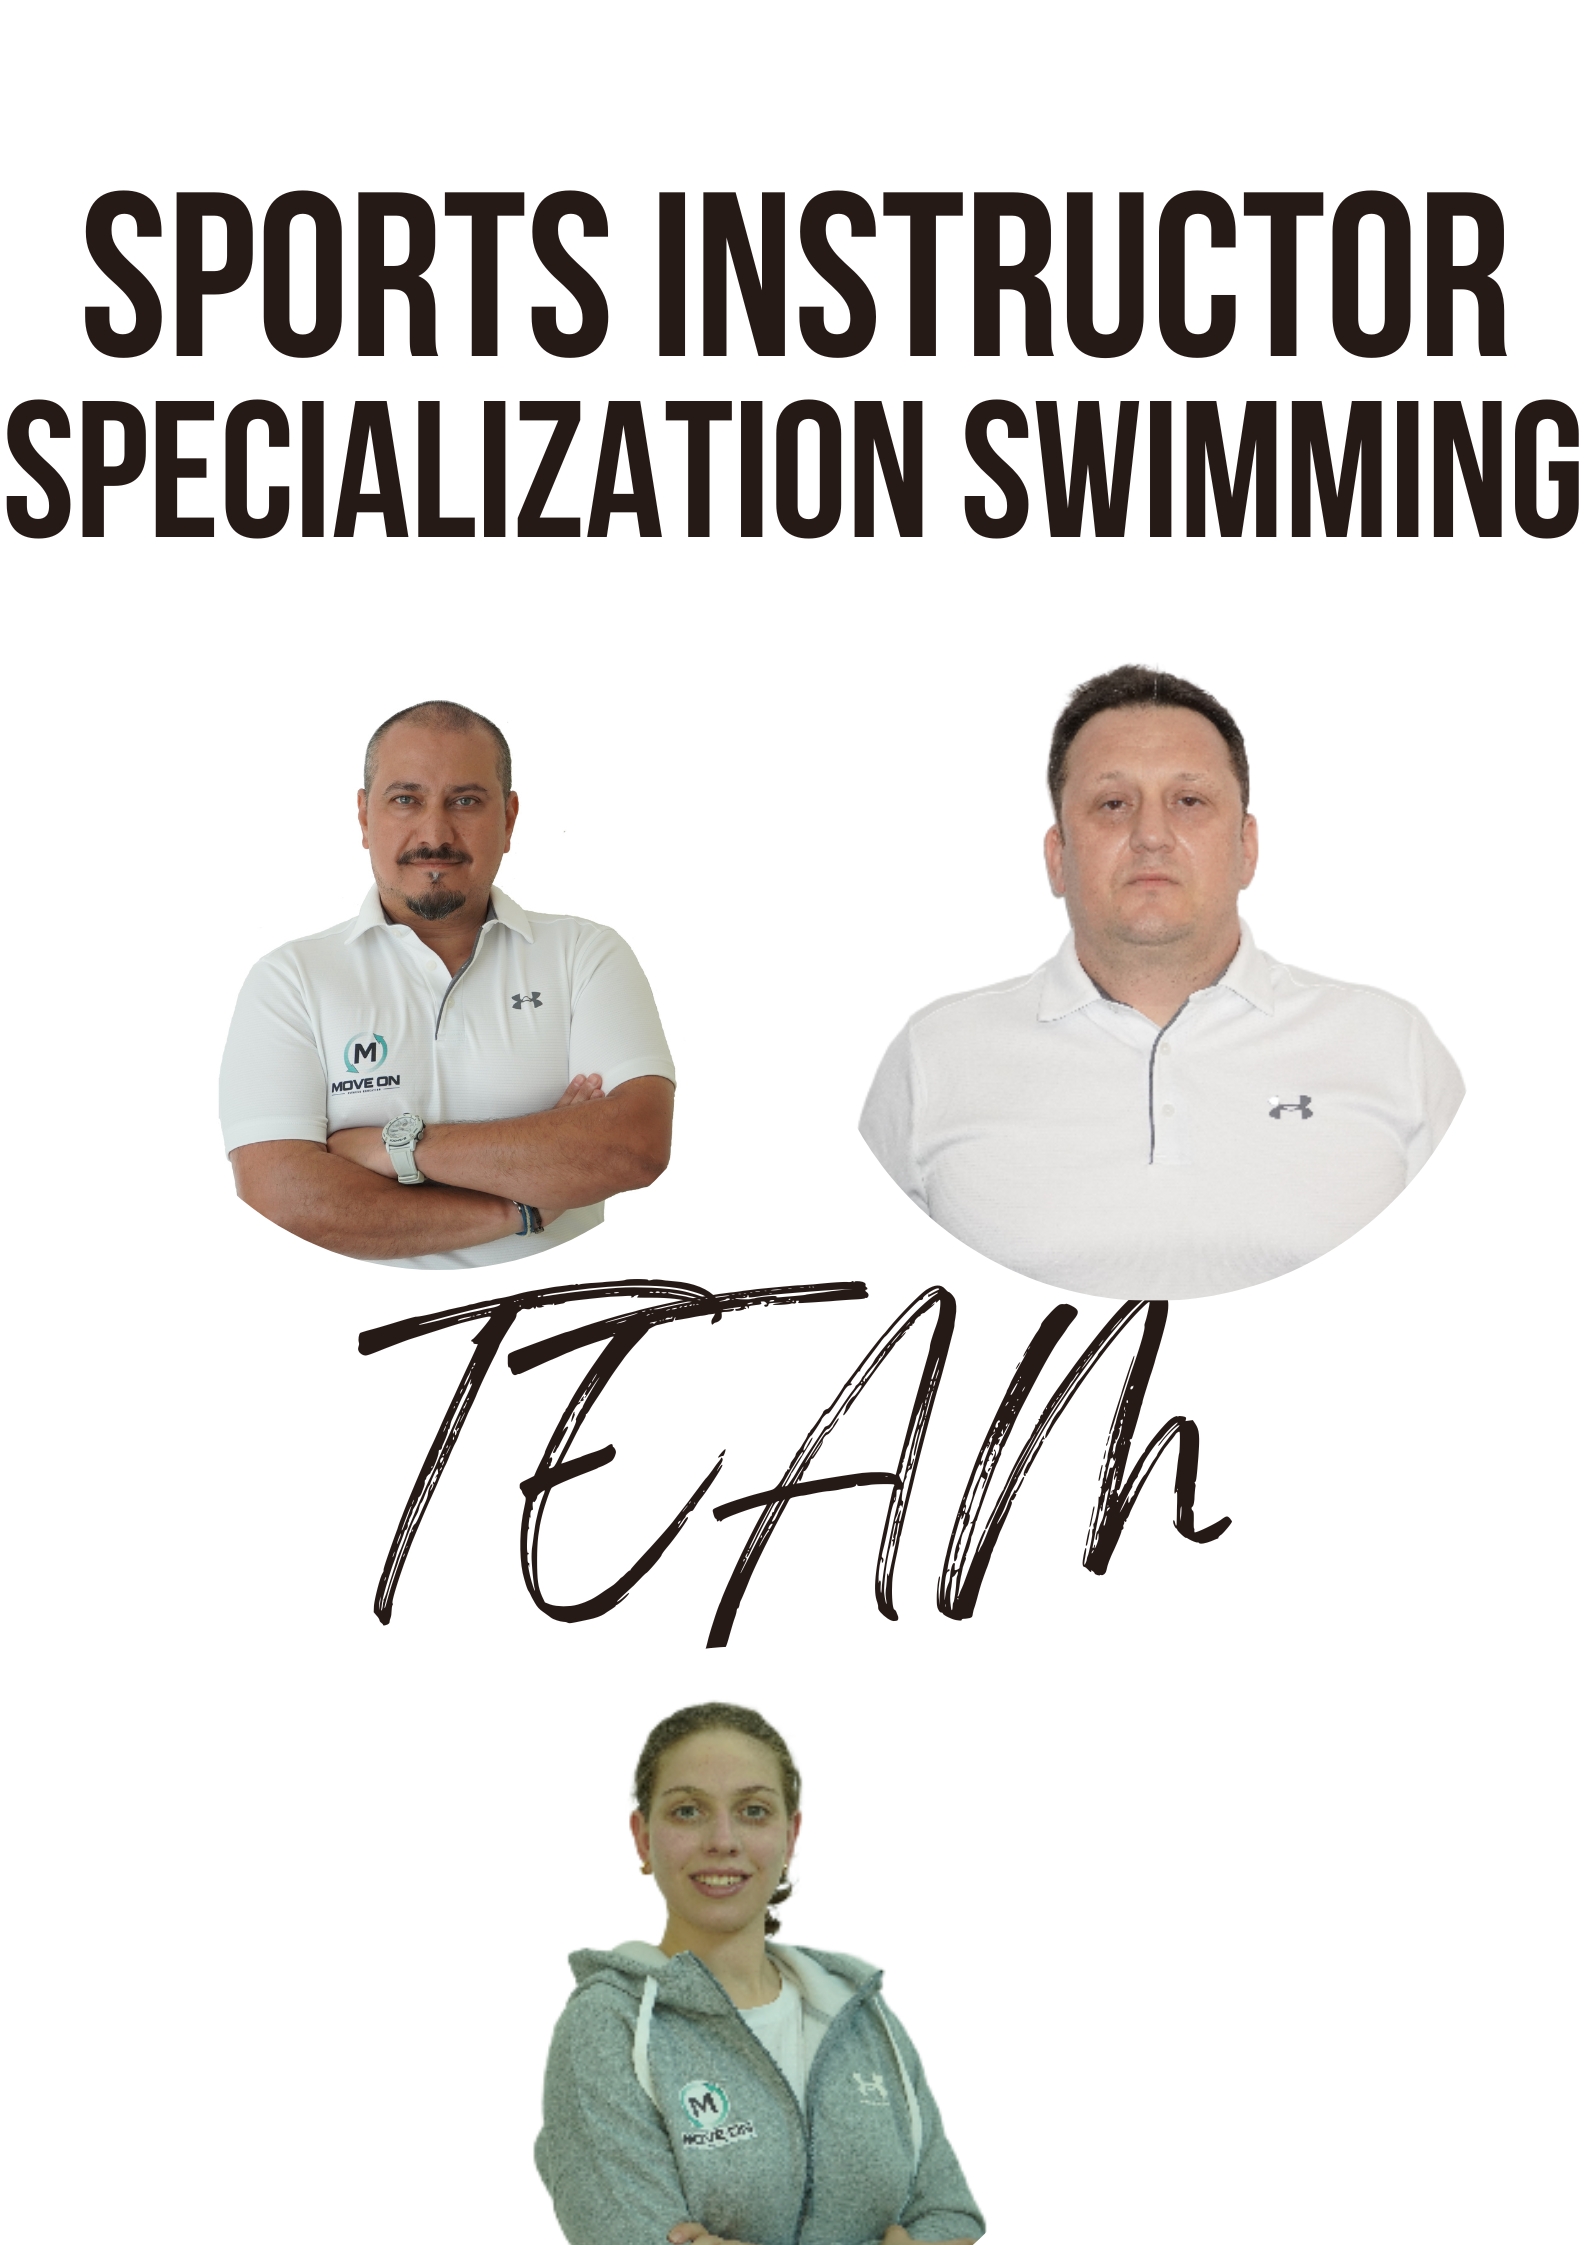 SPORTS INSTRUCTOR COURSE - SPECIALIZATION SWIMMING TEAM